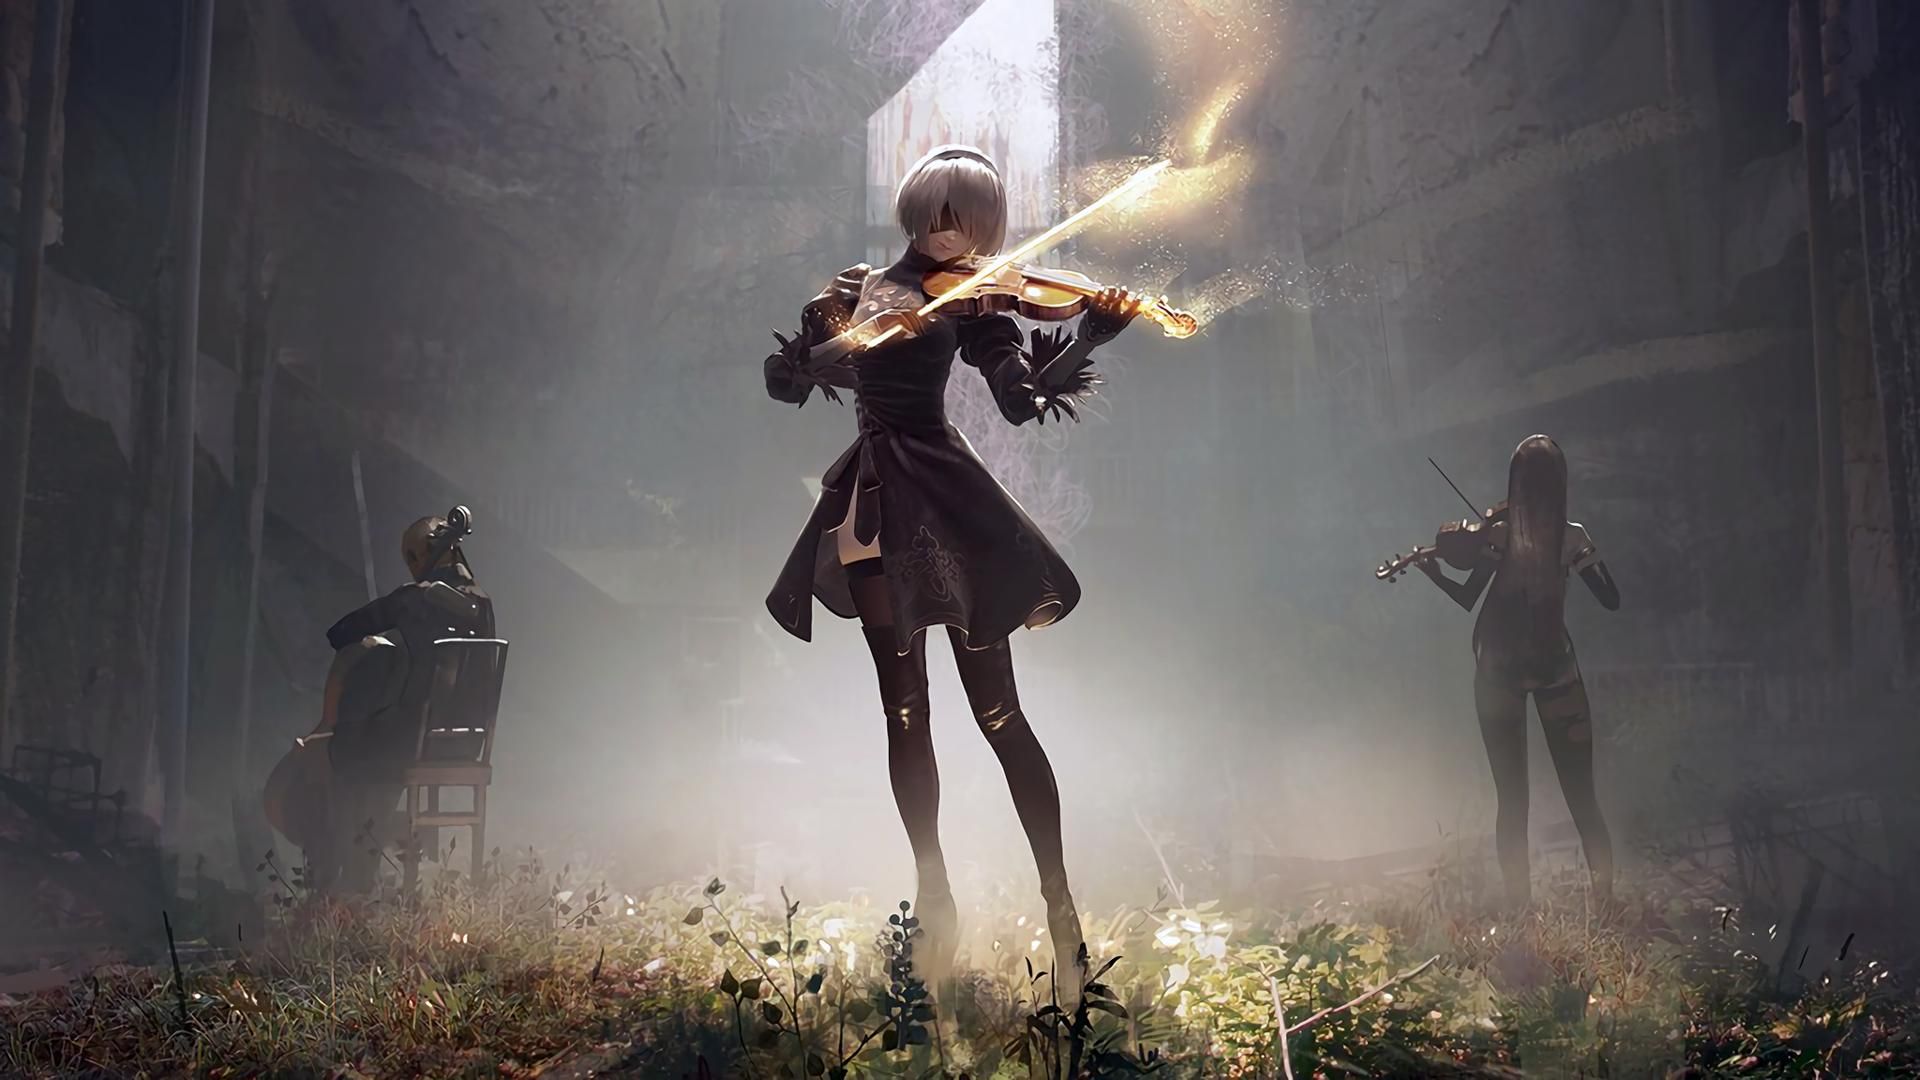 Free Download Nier Music Concert Wallpaper Nierautomata 19x1080 In 19x1080 For Your Desktop Mobile Tablet Explore 51 Nier Automata Wallpapers Nier Automata Wallpapers Nier Wallpaper Nier Replicant Wallpaper